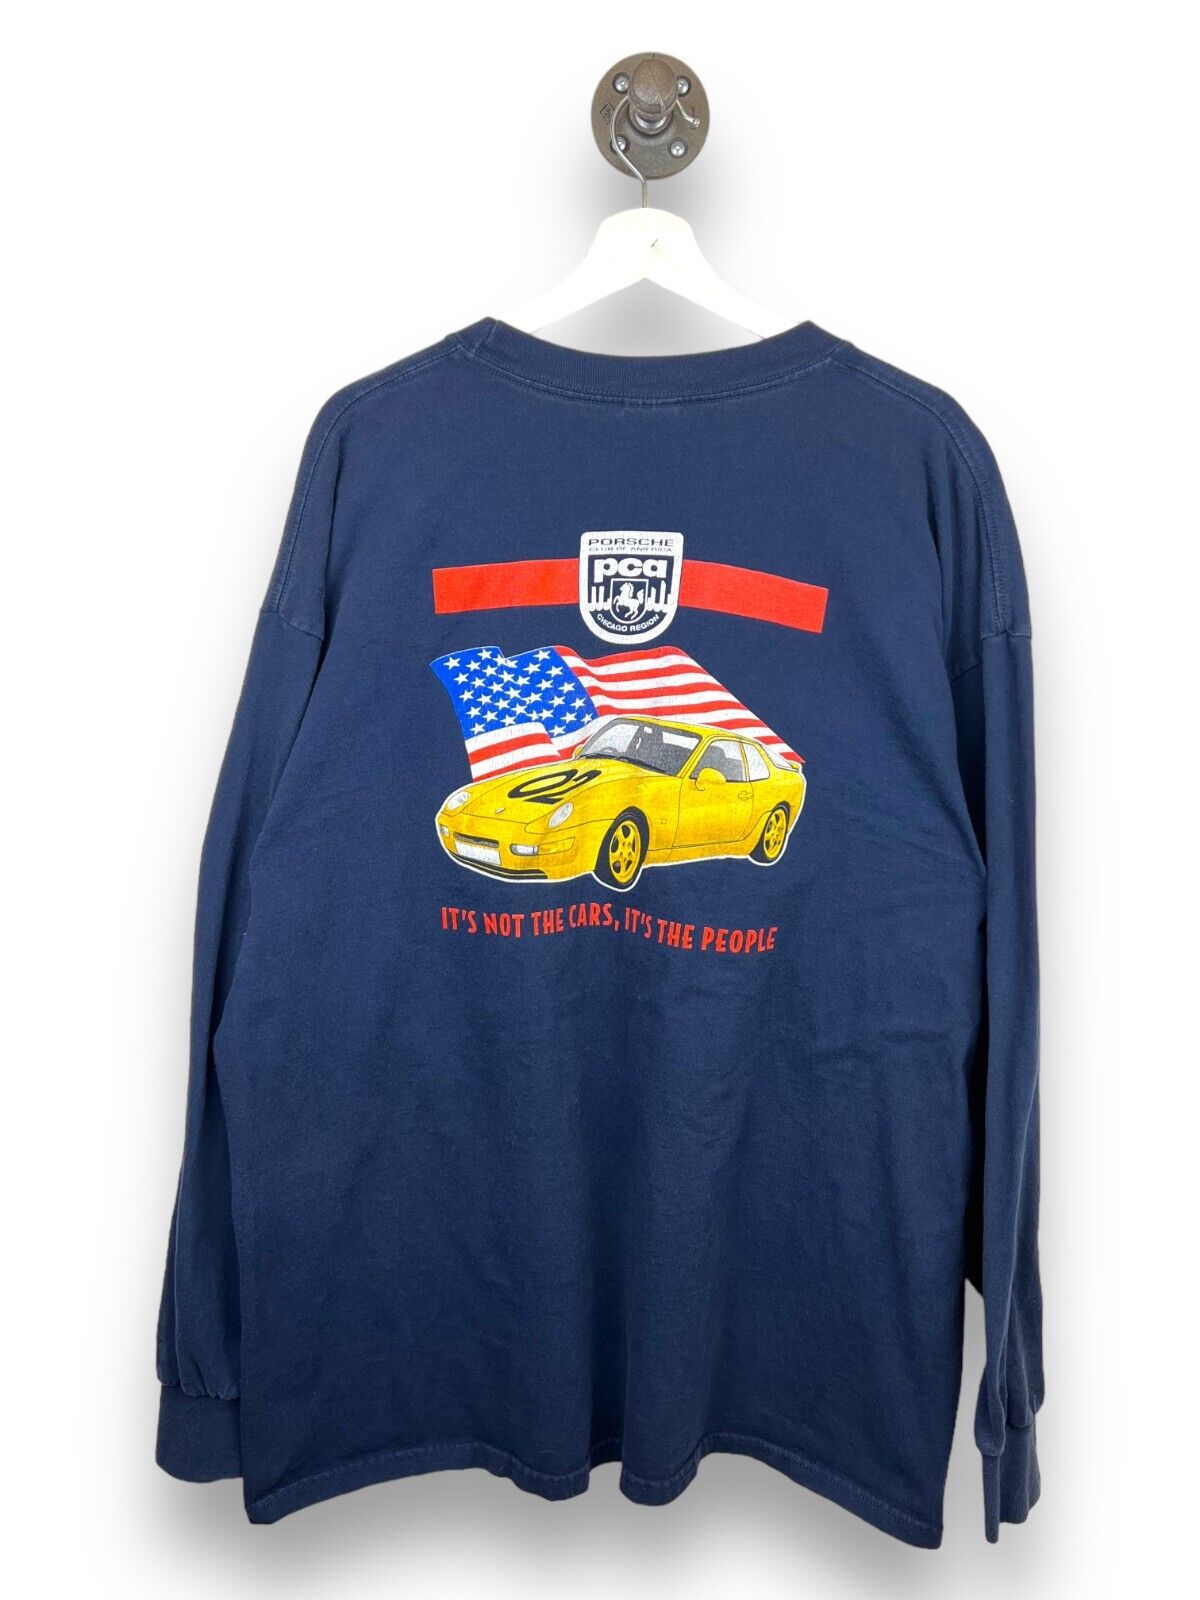 Vintage 2002 Porsche Club Of America It's Not The Cars T-Shirt Size 2XL